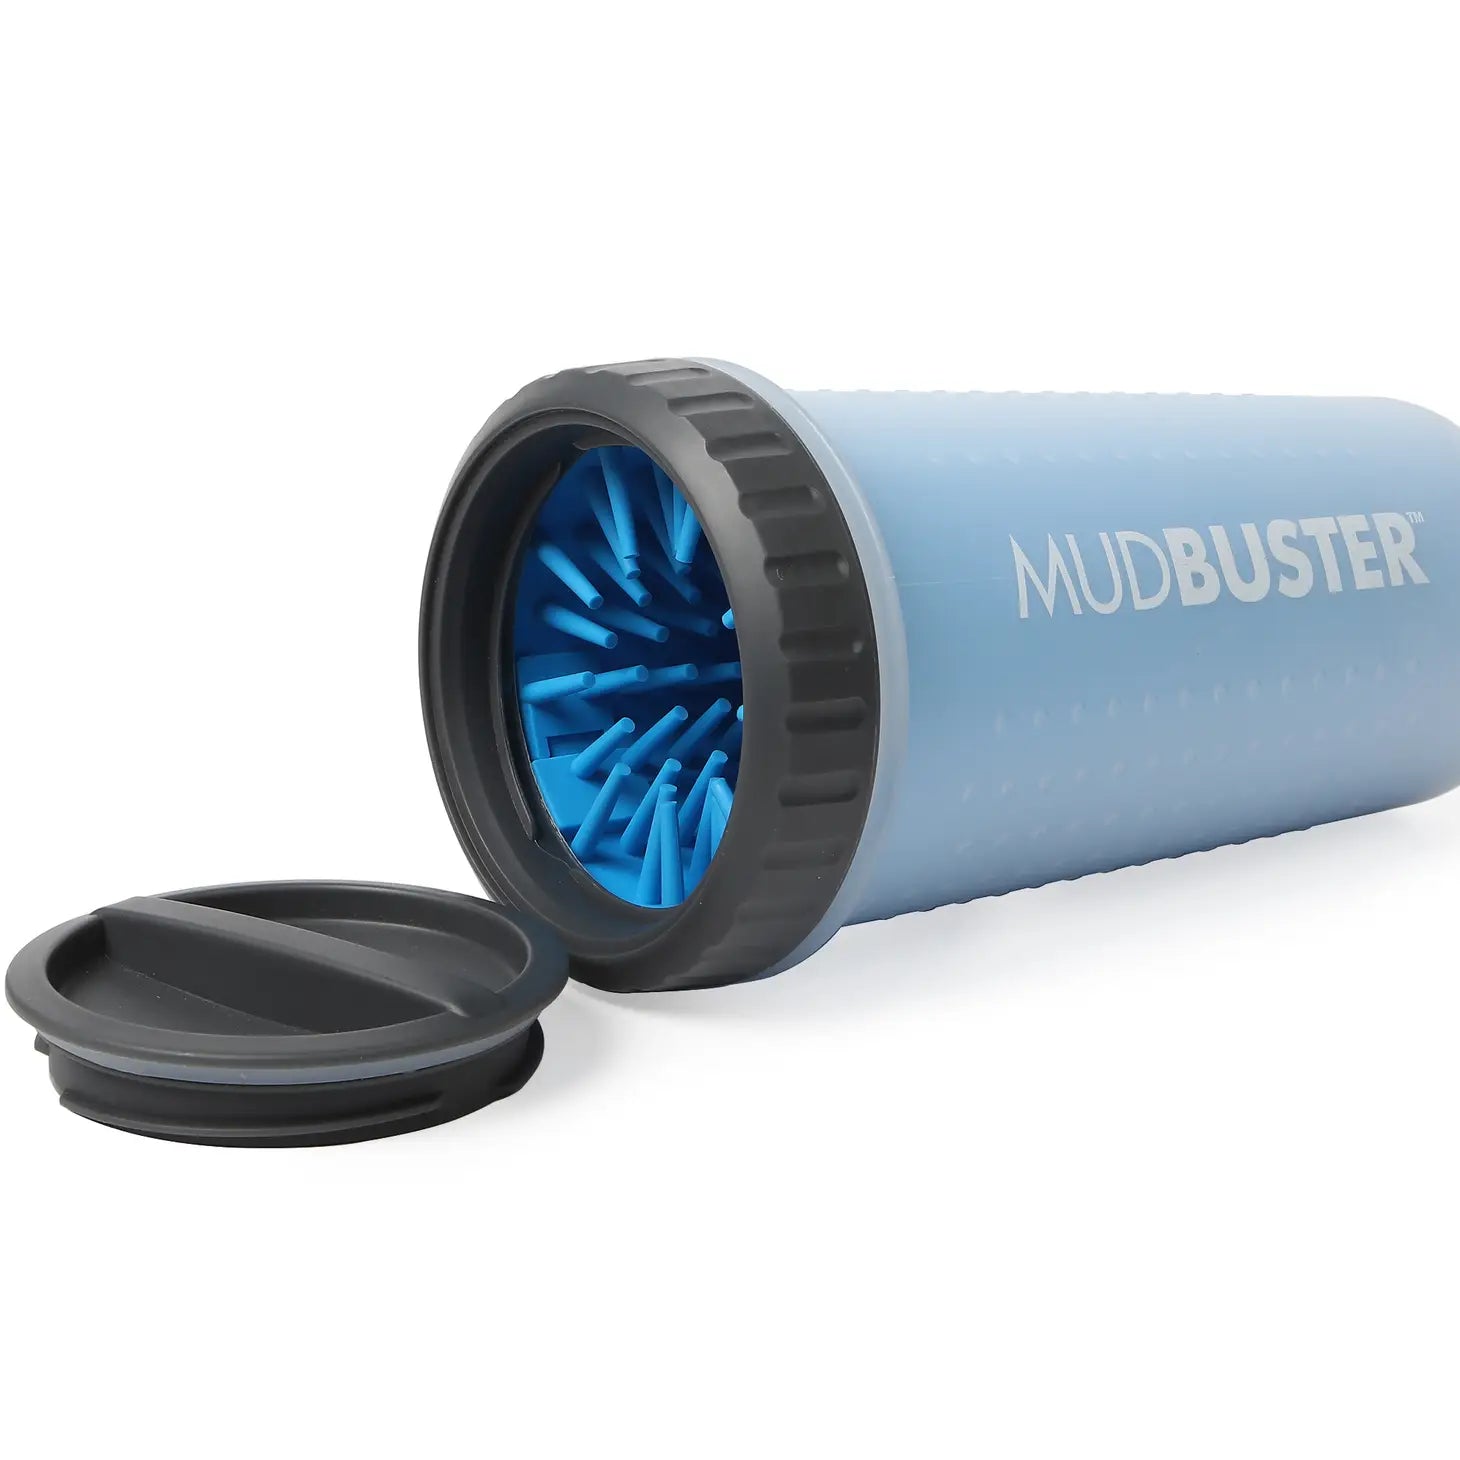 Mud Buster w/ Travel Lid Blue